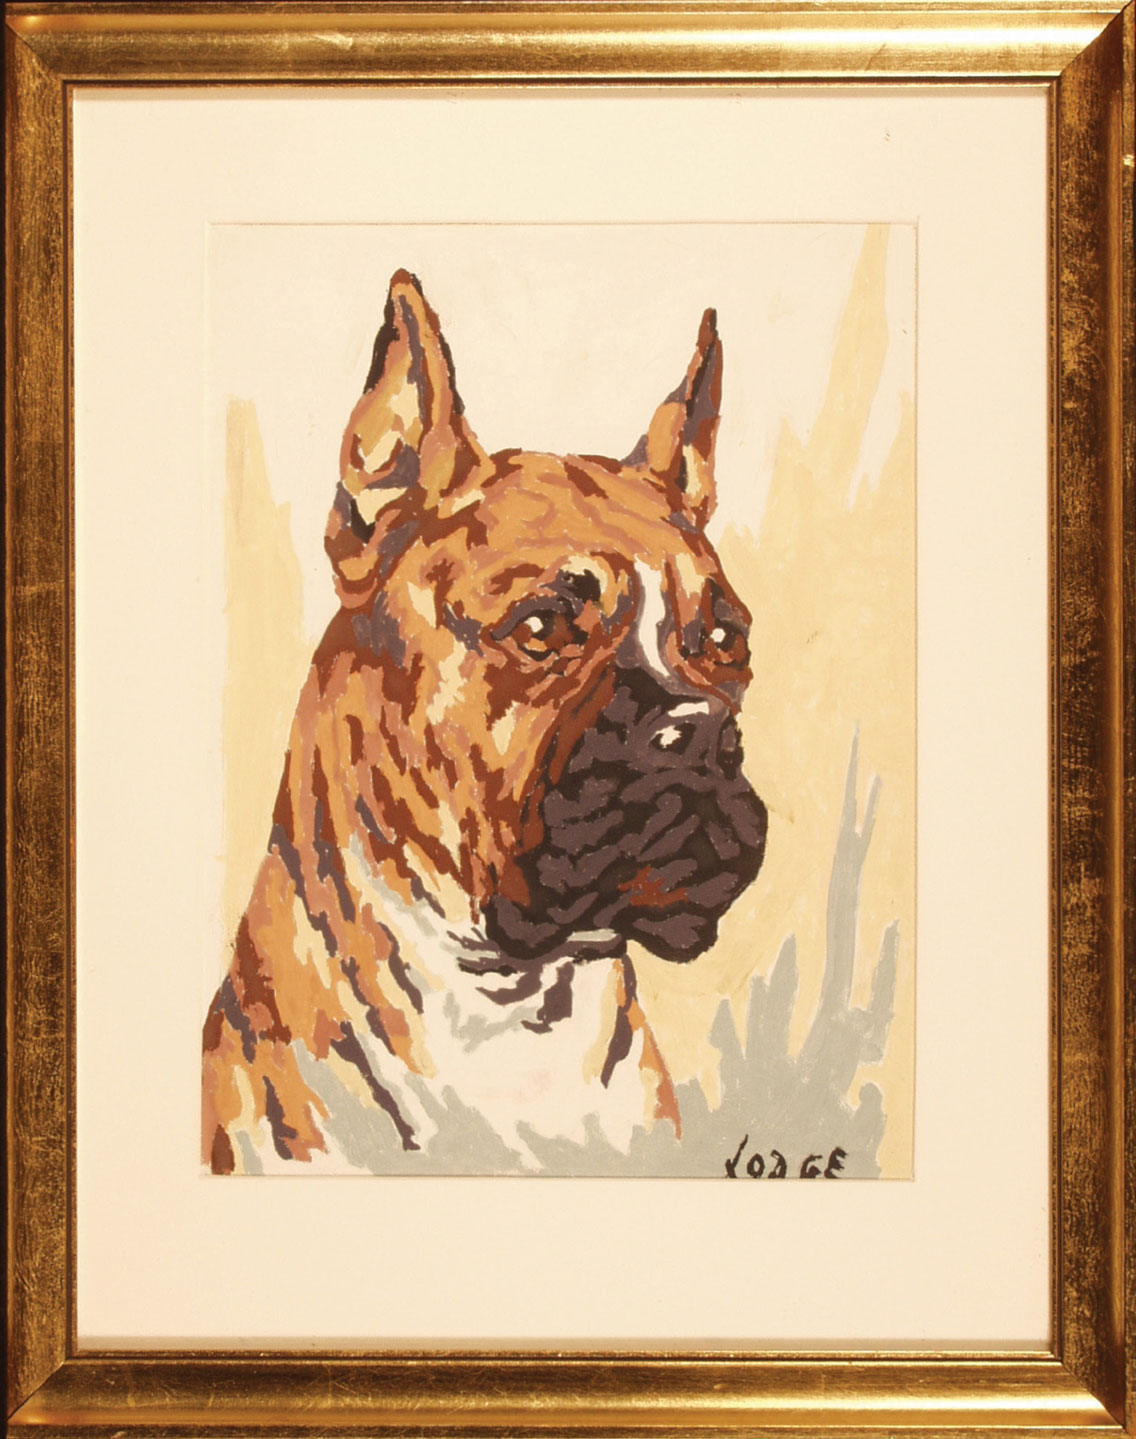 Painting of a dog by Henry Cabot Lodge, Jr., US ambassador to the UN from 1953 to 1960.